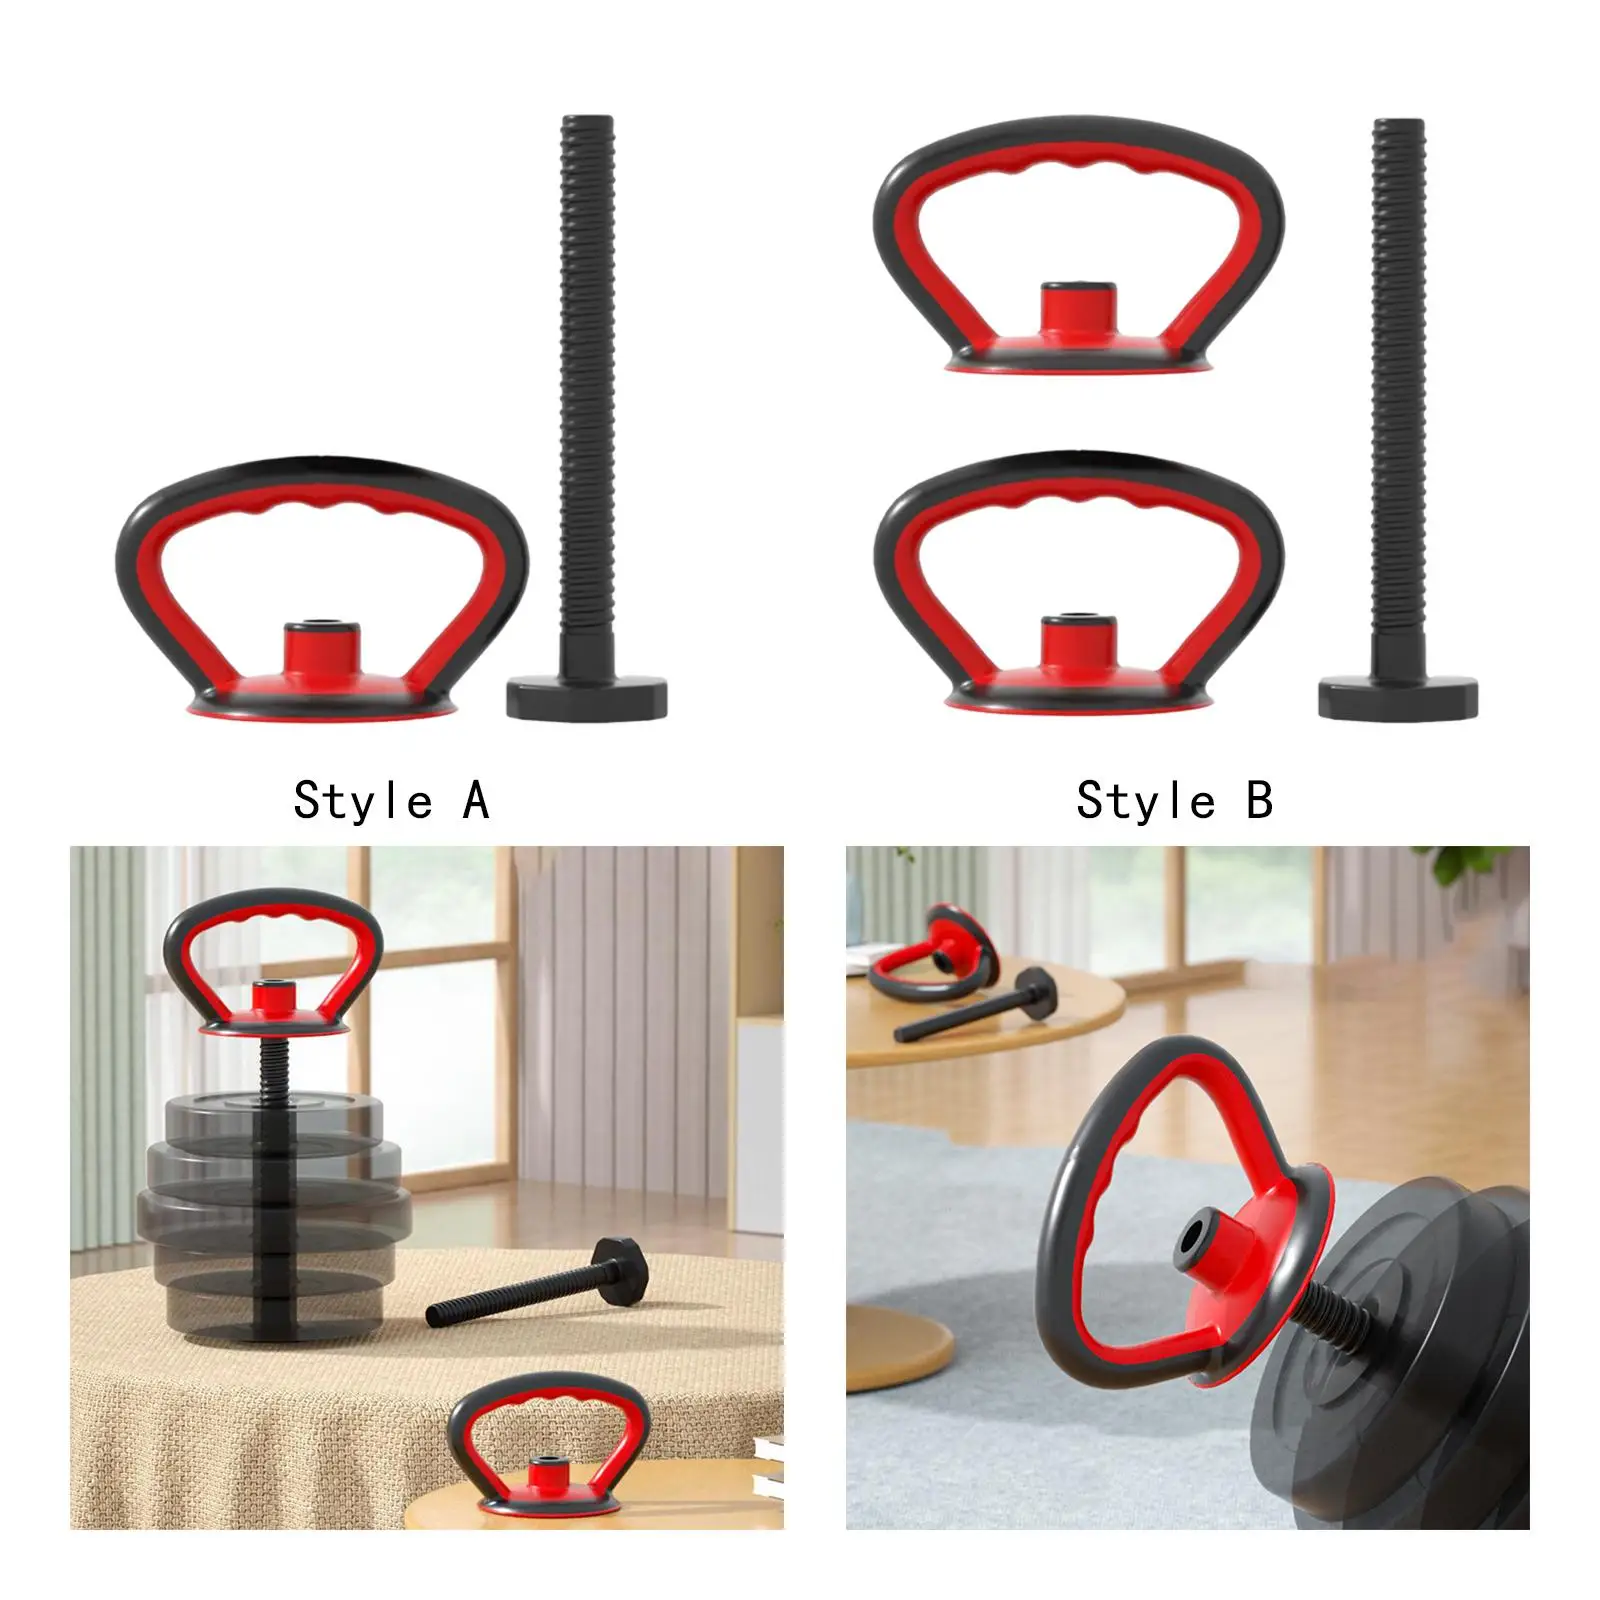 Kettlebell Handle Multifunctional Convenient and Comfortable Kettlebell Grip